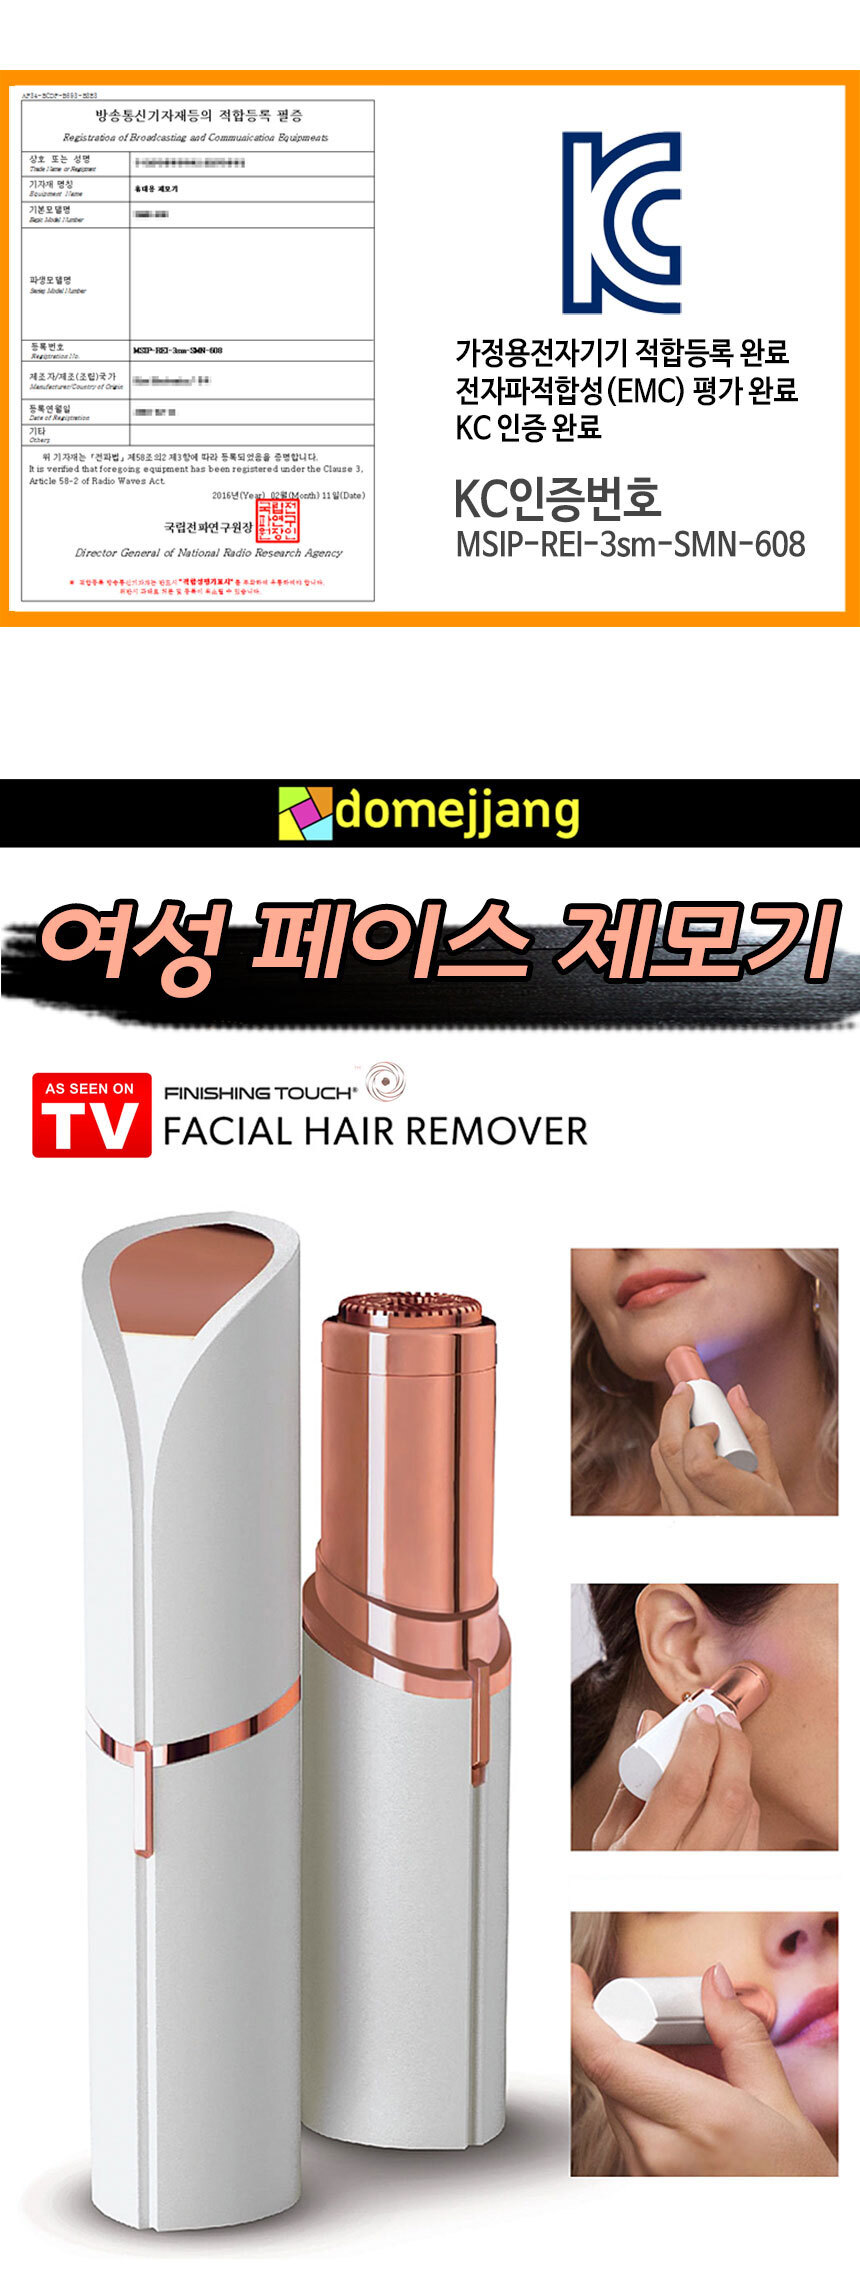 Gmarket - Face hair removal machine Face down remover Womens razor